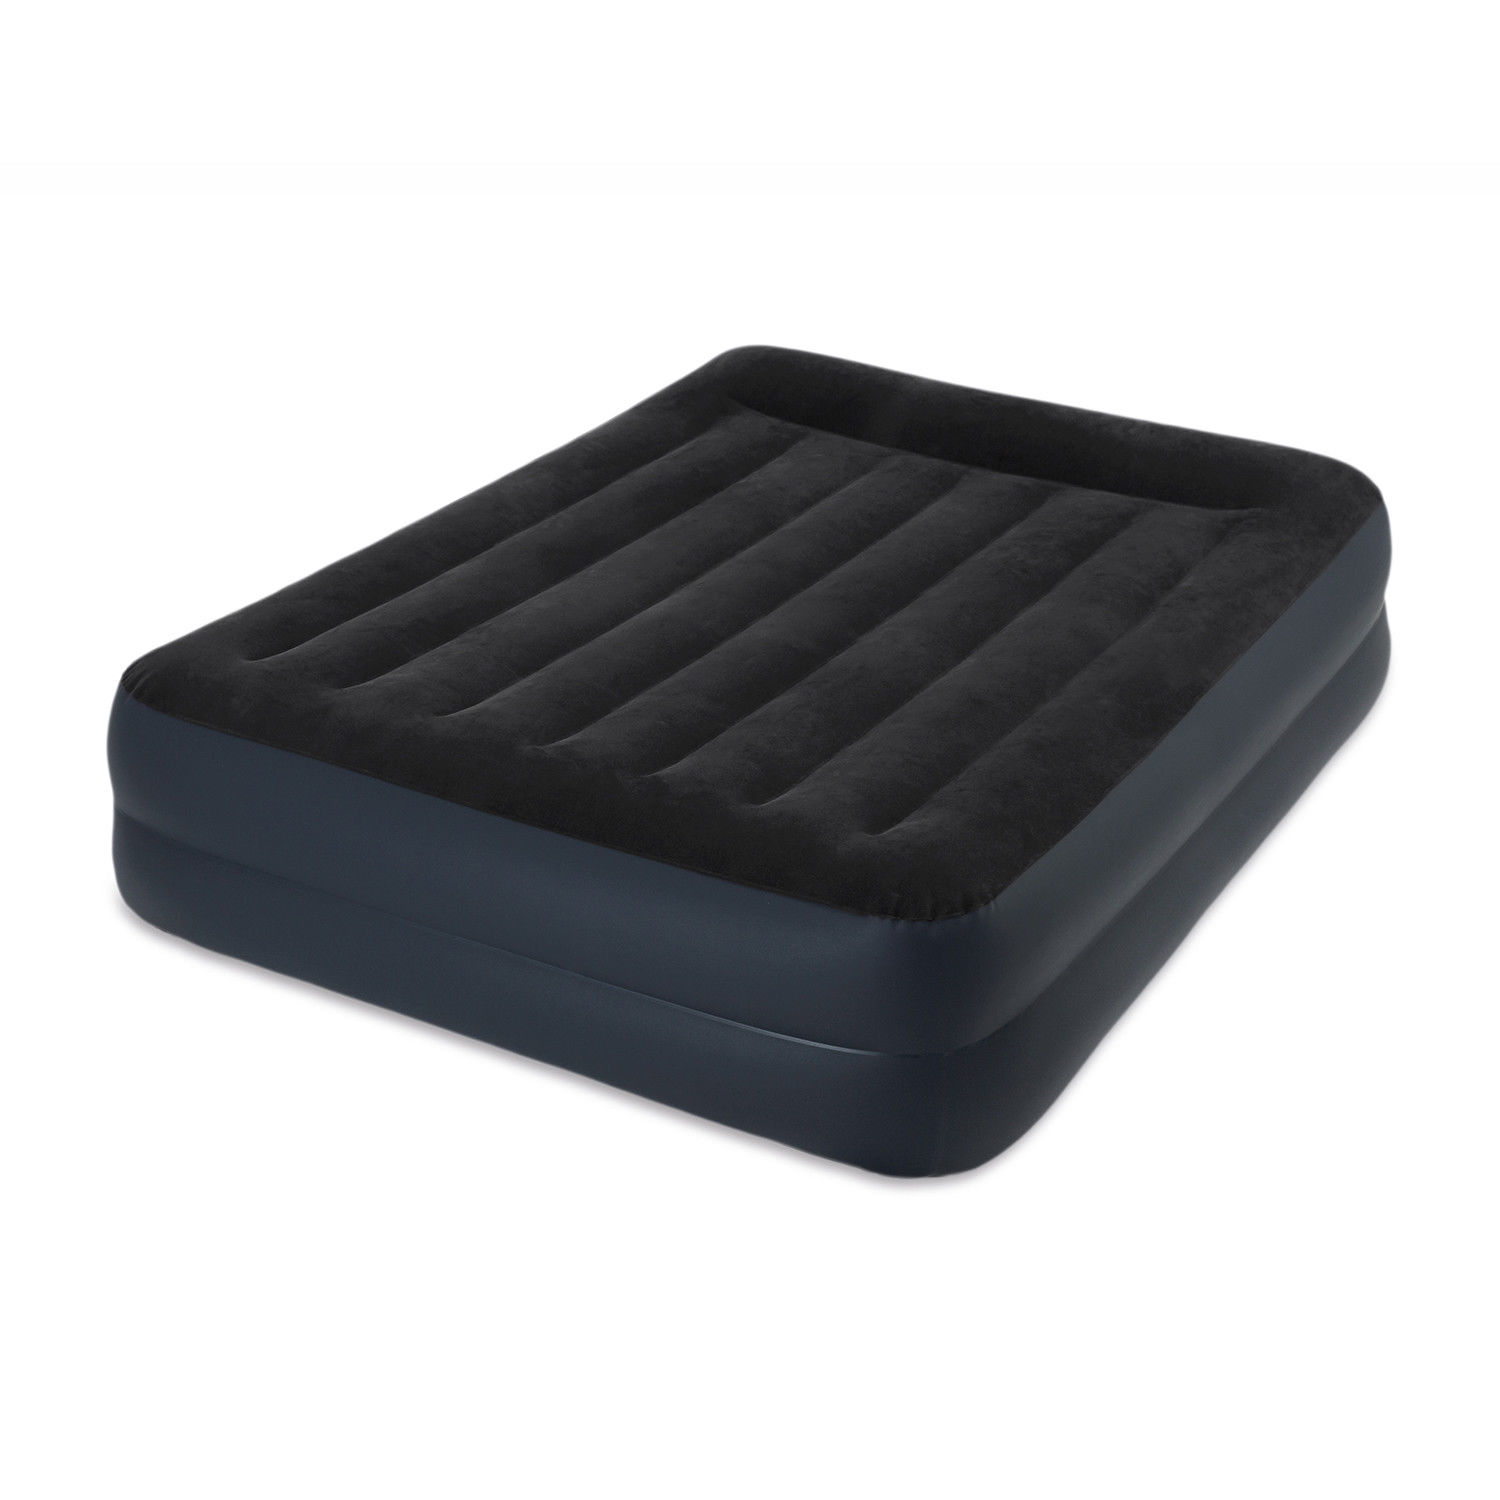 Intex queen raised air mattress with built-in pump for $45, free shipping